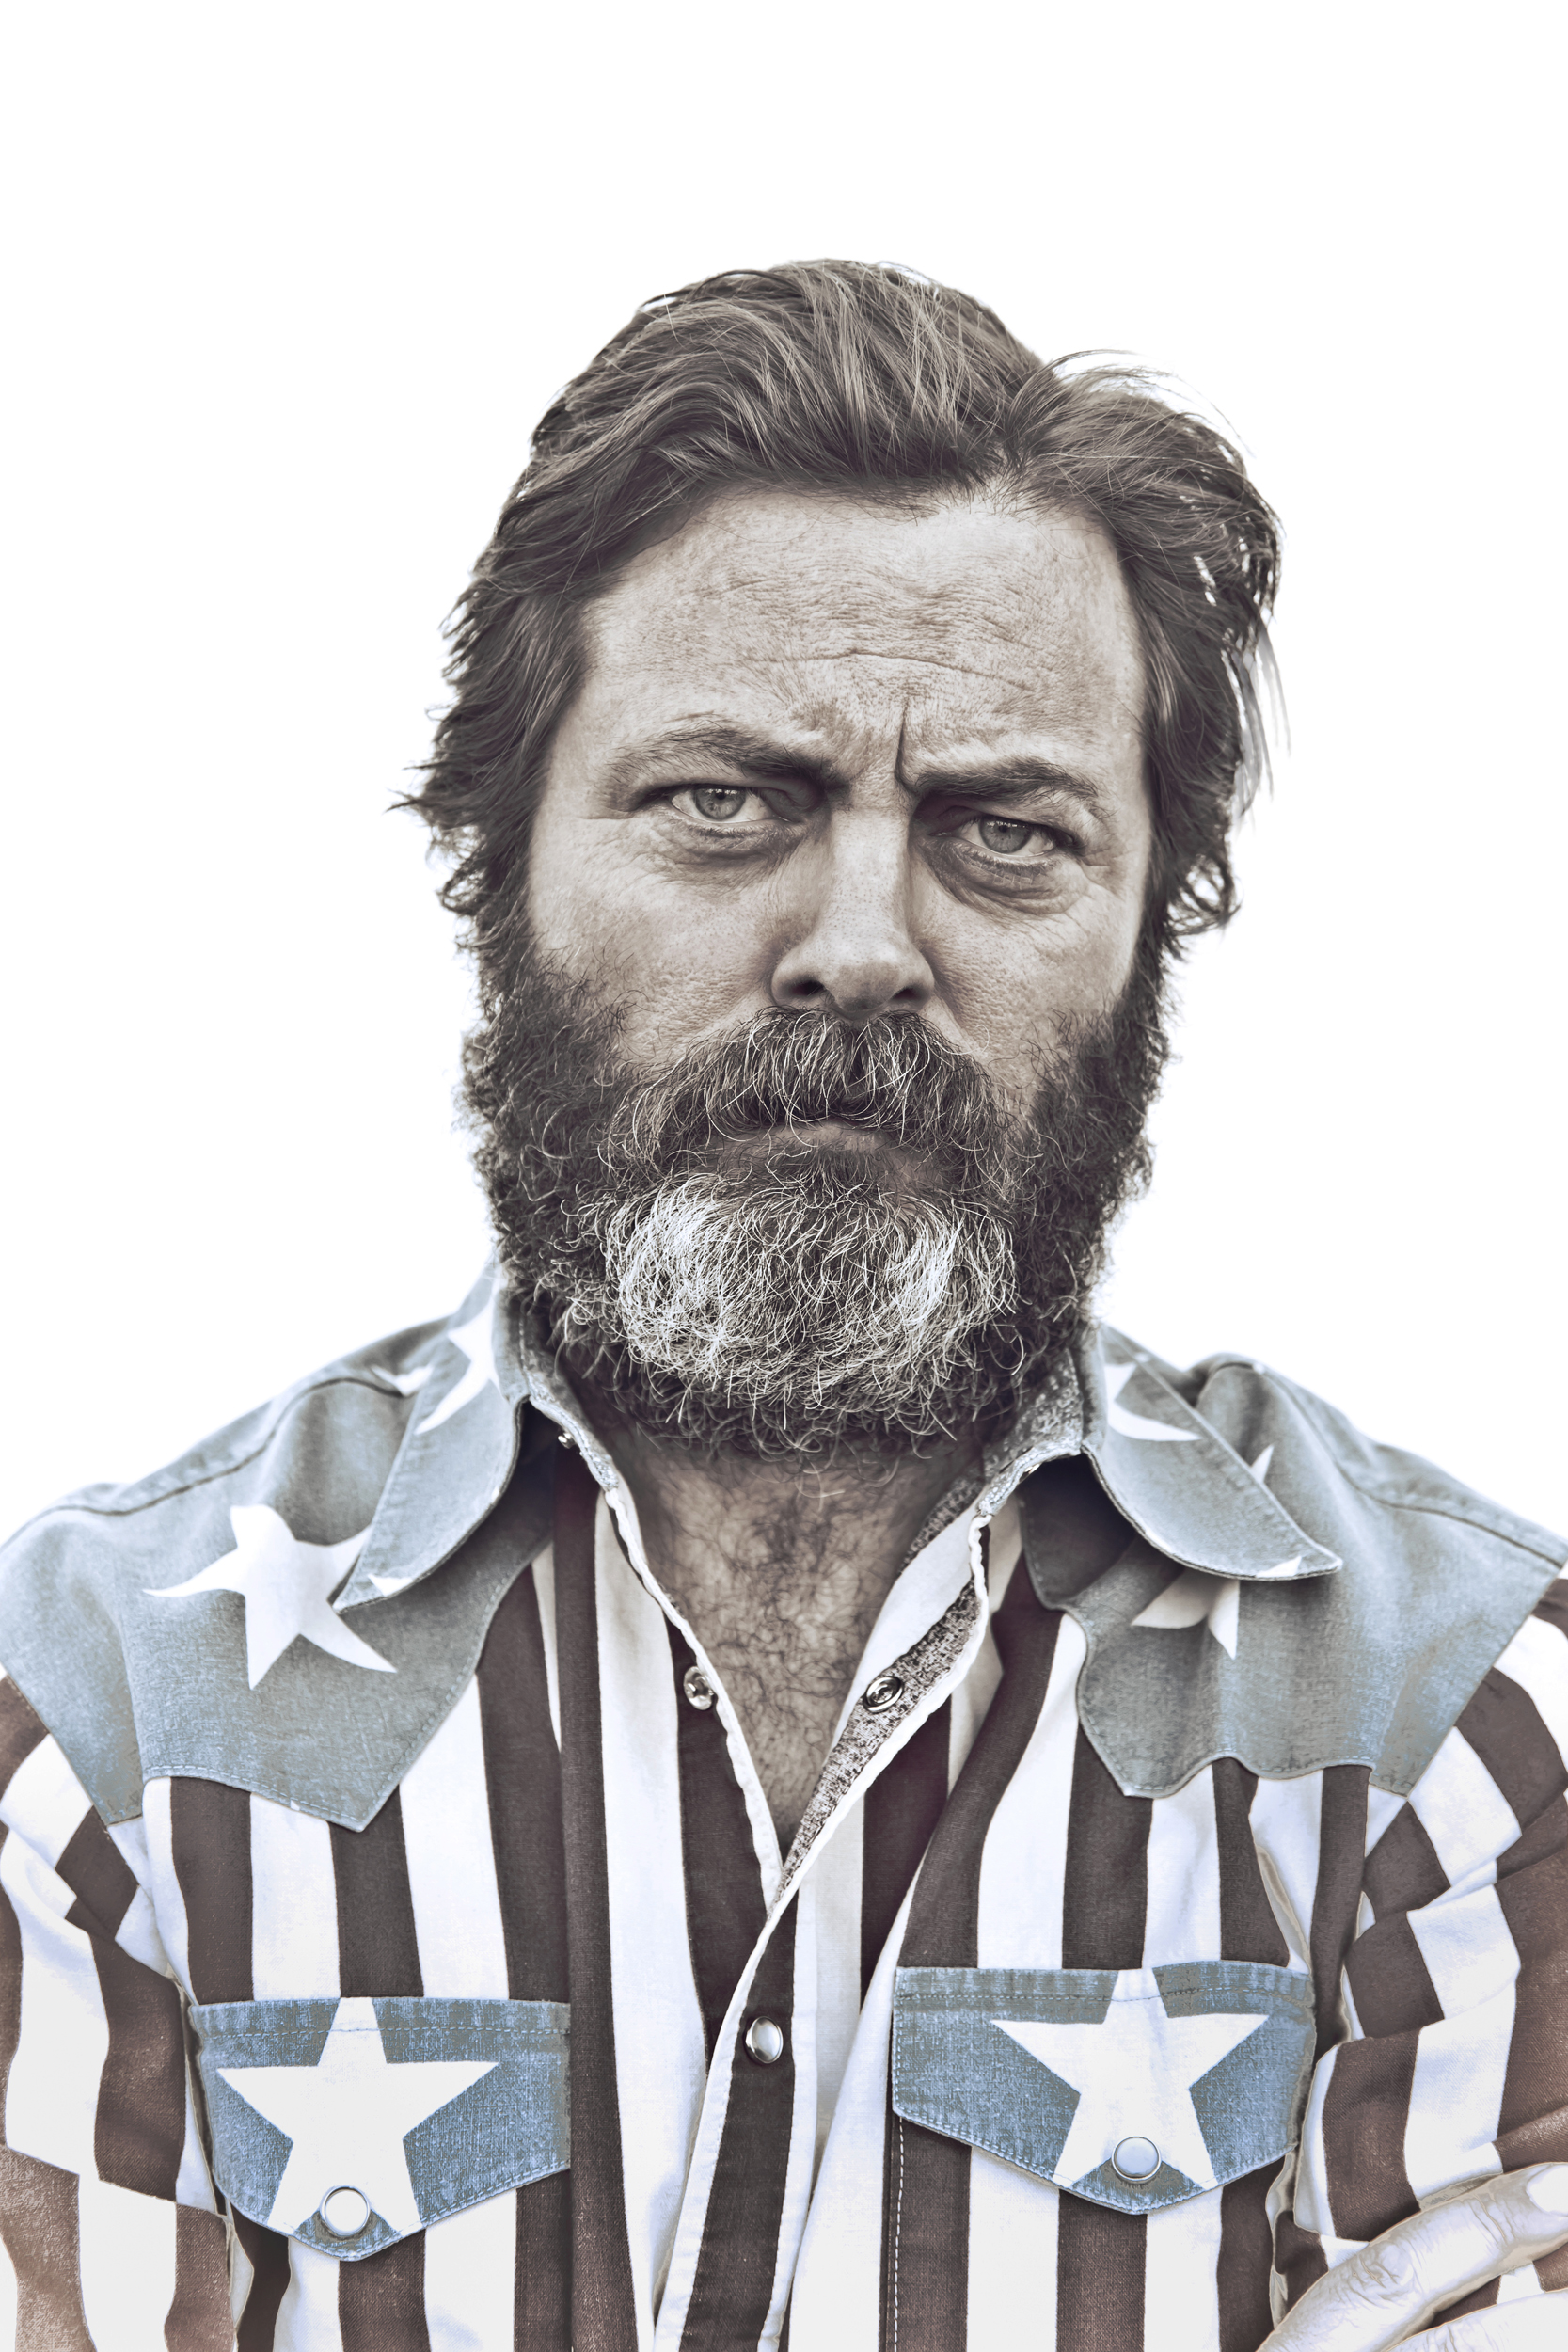 Nick Offerman performs at the 2015 Lucille Ball Comedy Festival